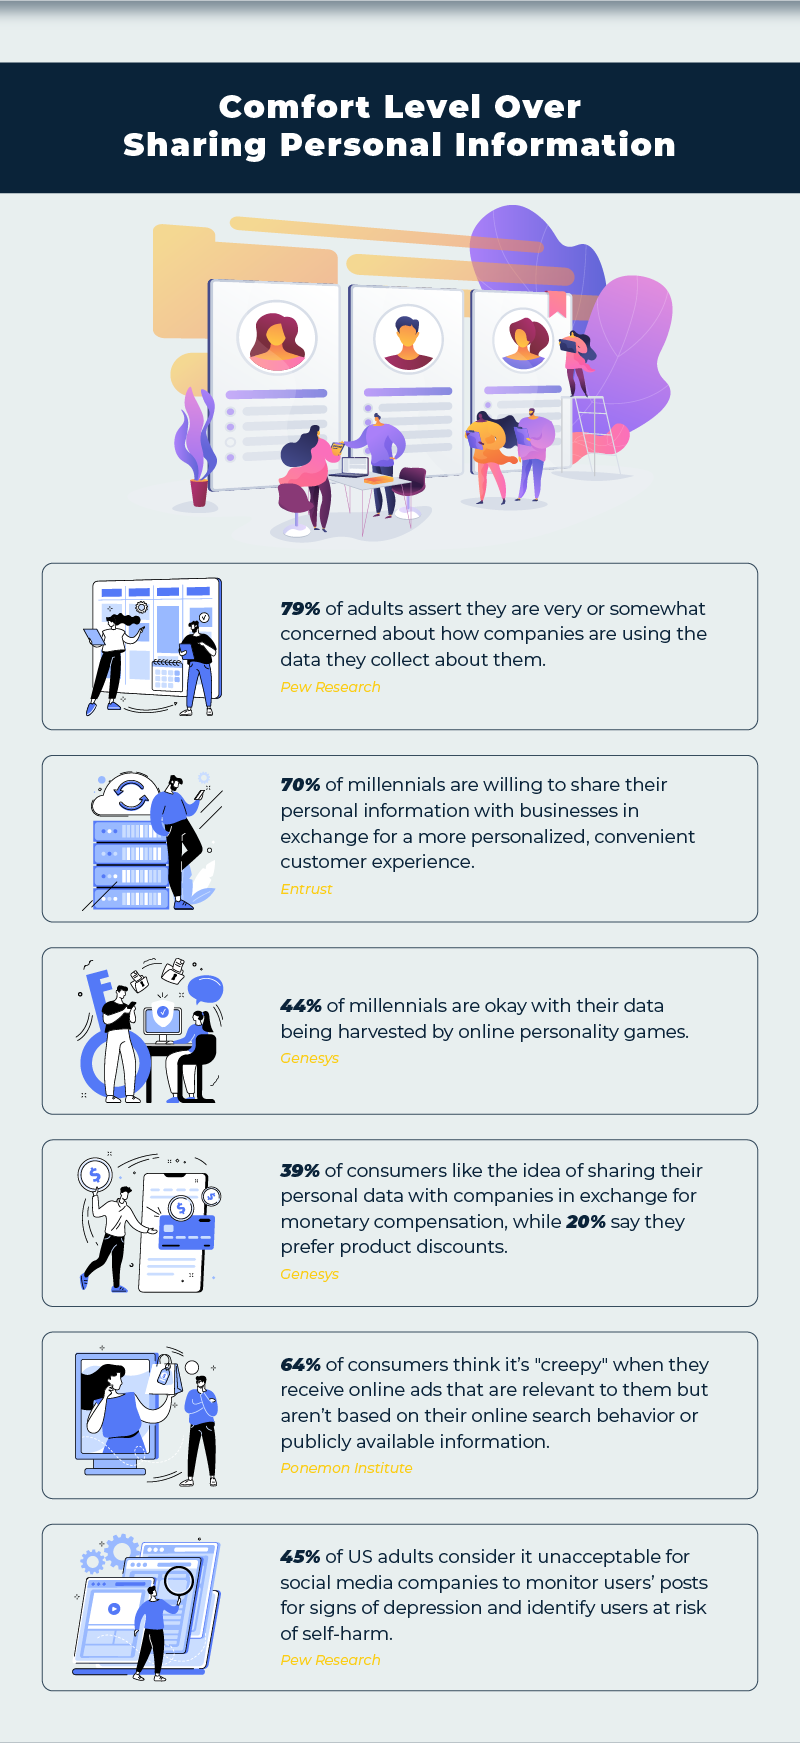 Statistics representing people's comfort level over sharing personal information